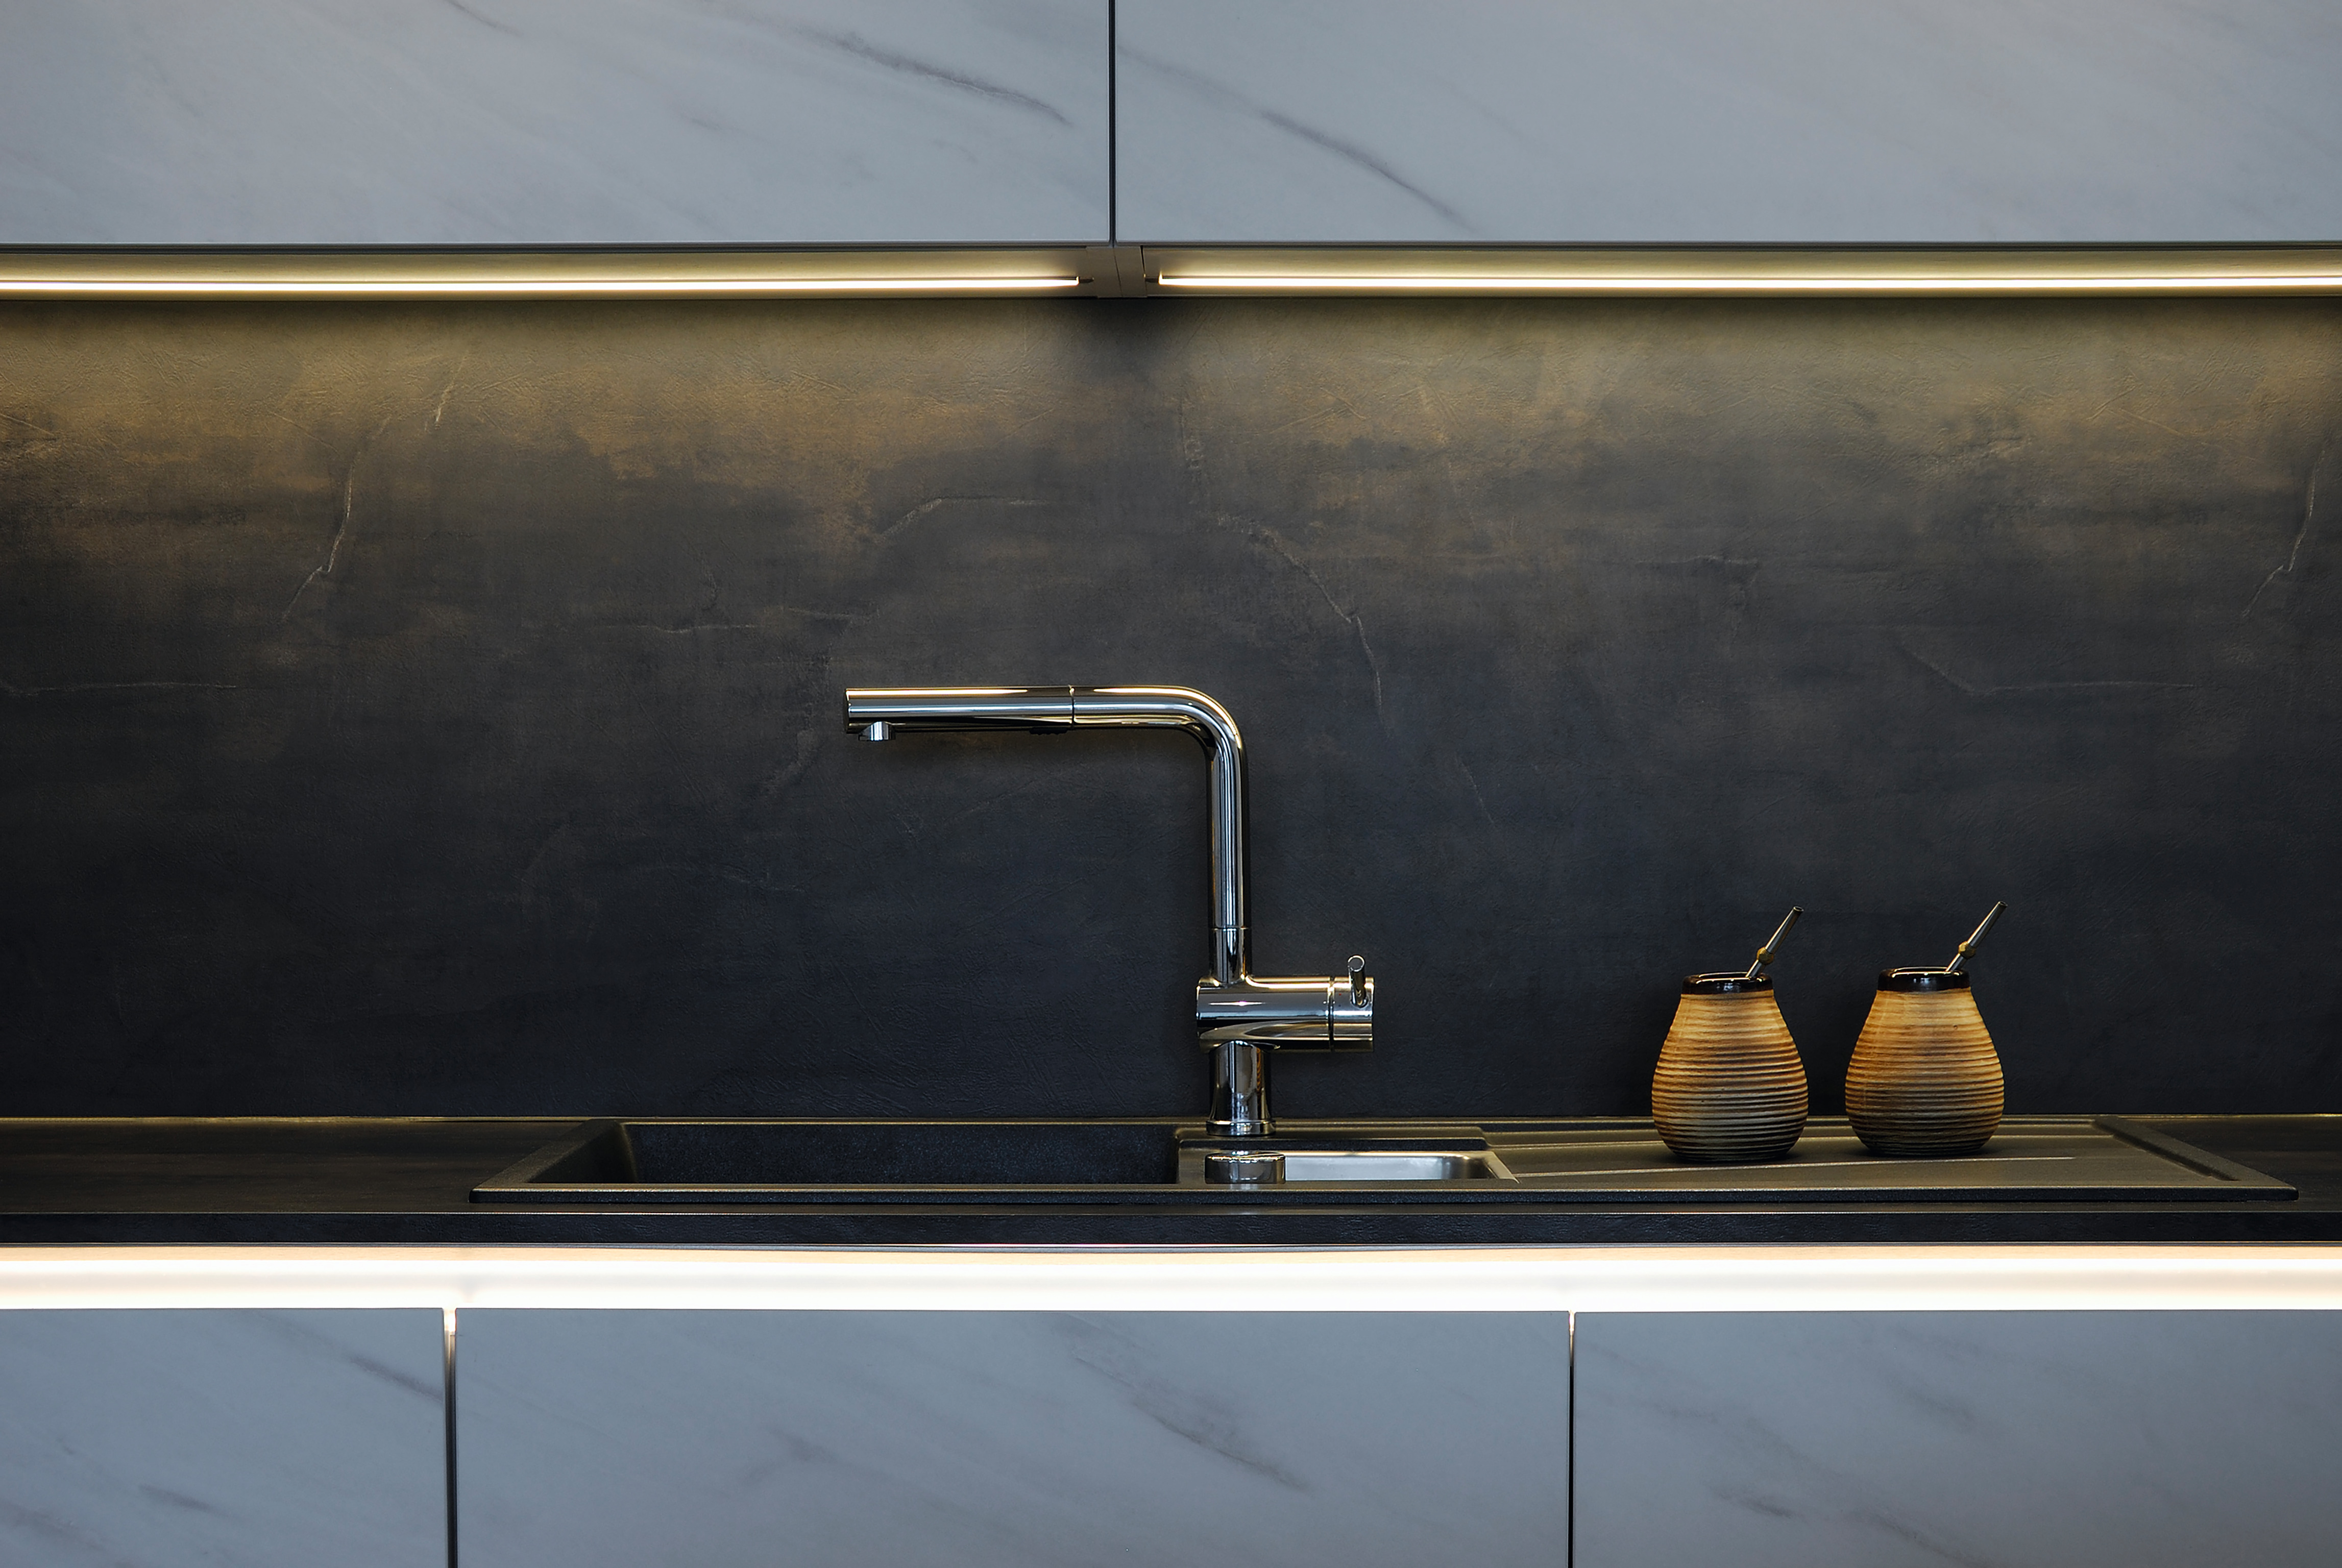 Metallic looks and marble as a harmonious contrast in kitchen design.